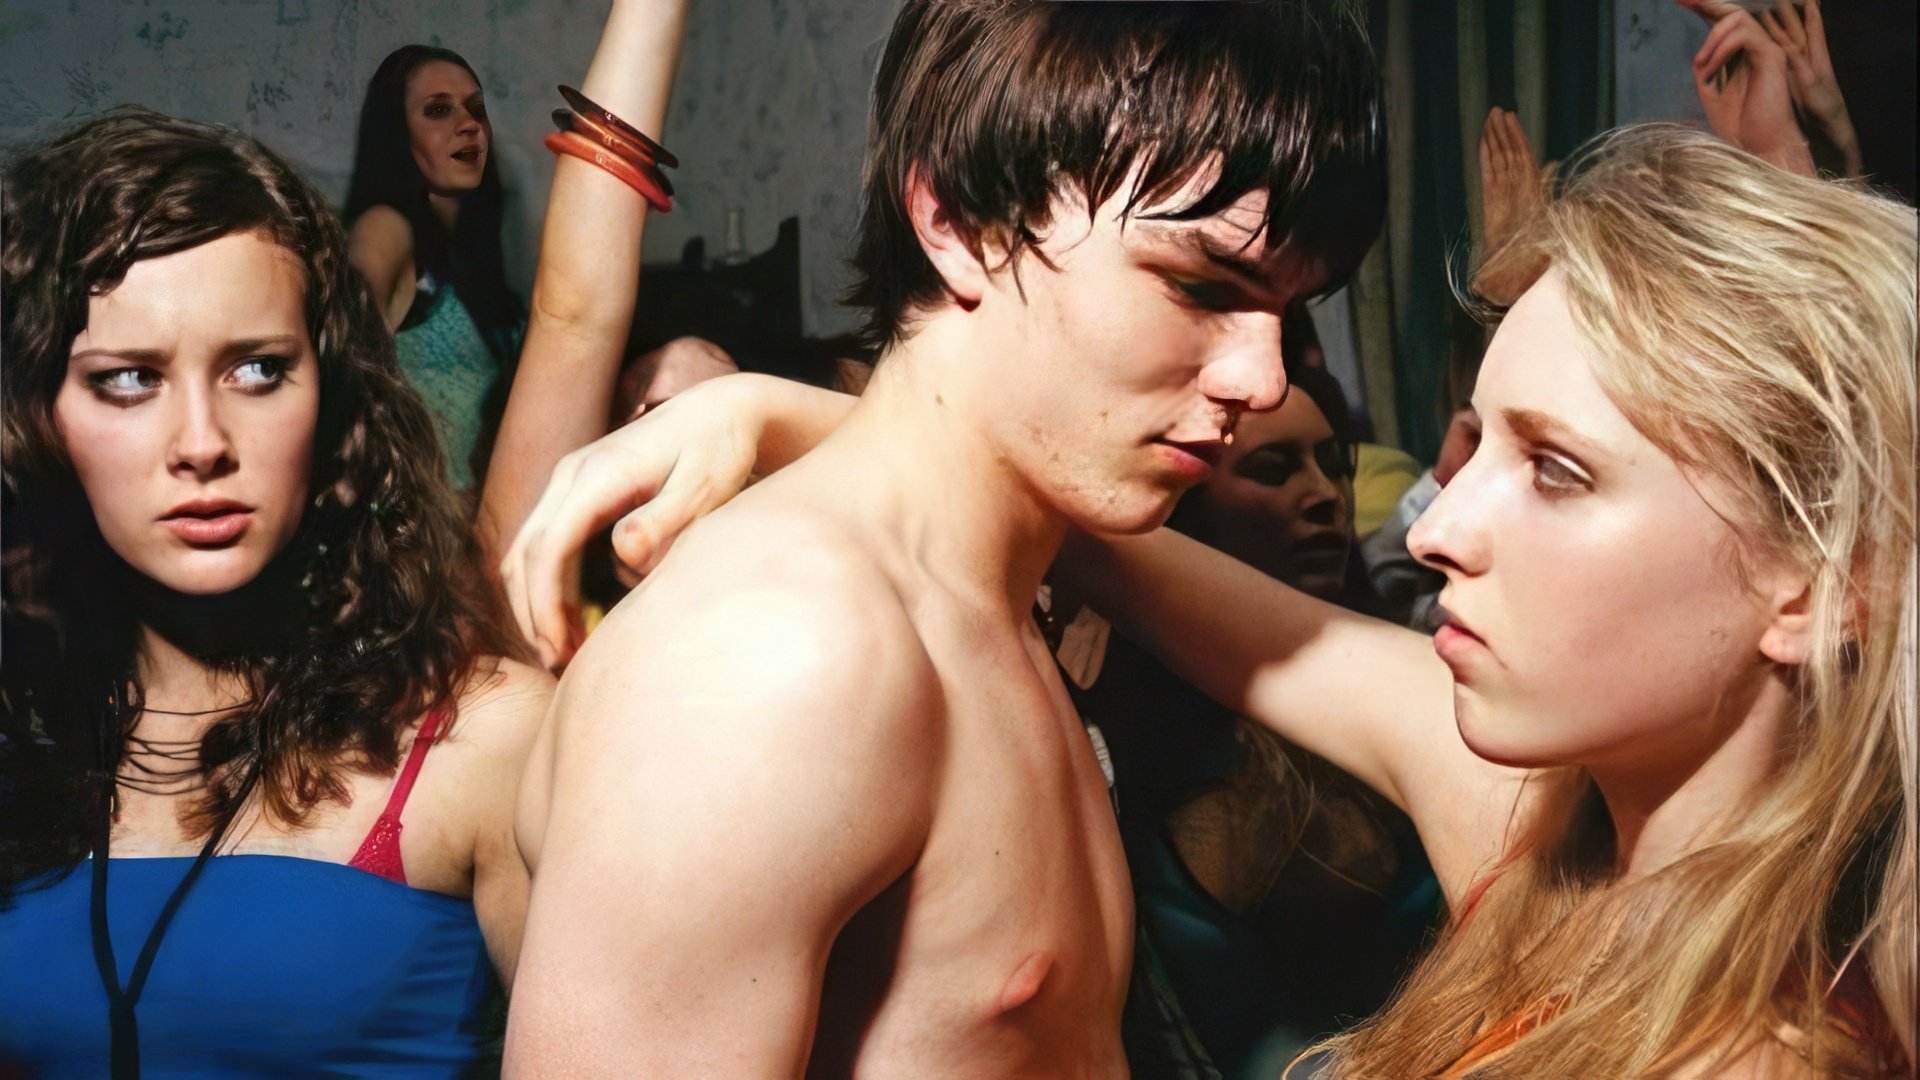 Nicholas Hoult’s role in Skins was a real breakthrough